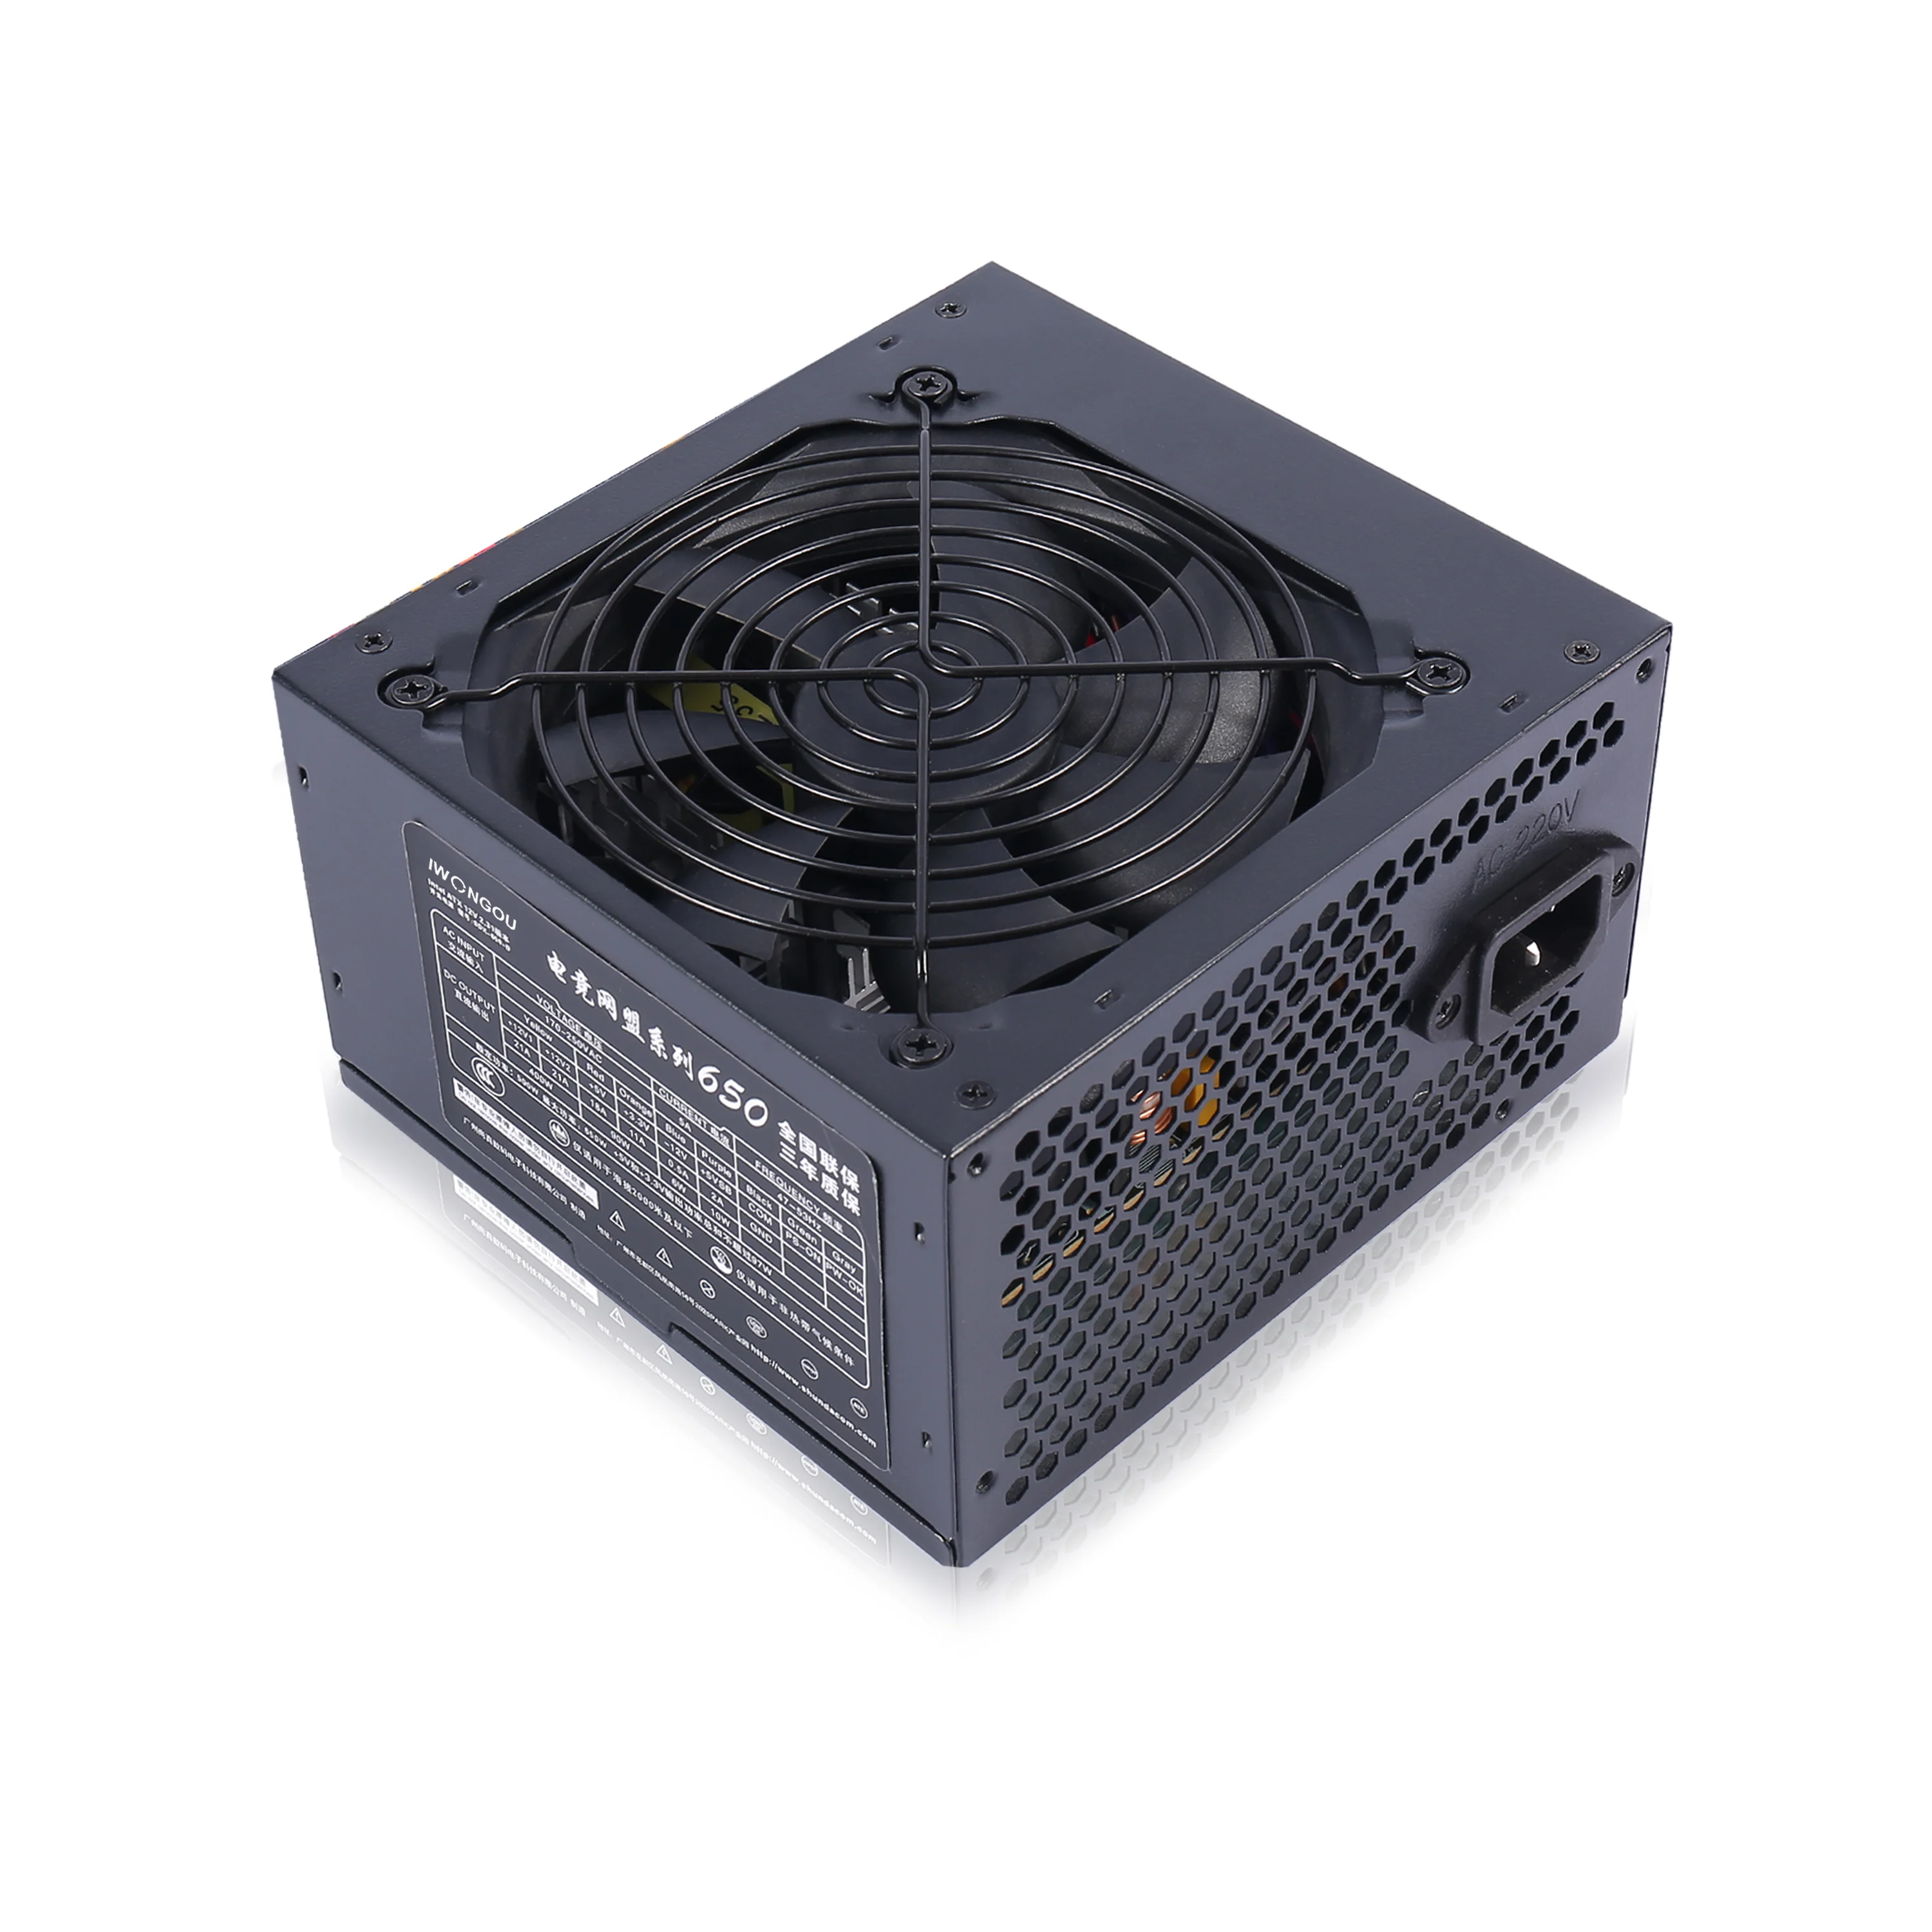 IWONGOU 650W Max Power Supply For PC 24pin 12v Atx Active PFC Computer Font For Desktop Gaming ESA650 PSU images - 6